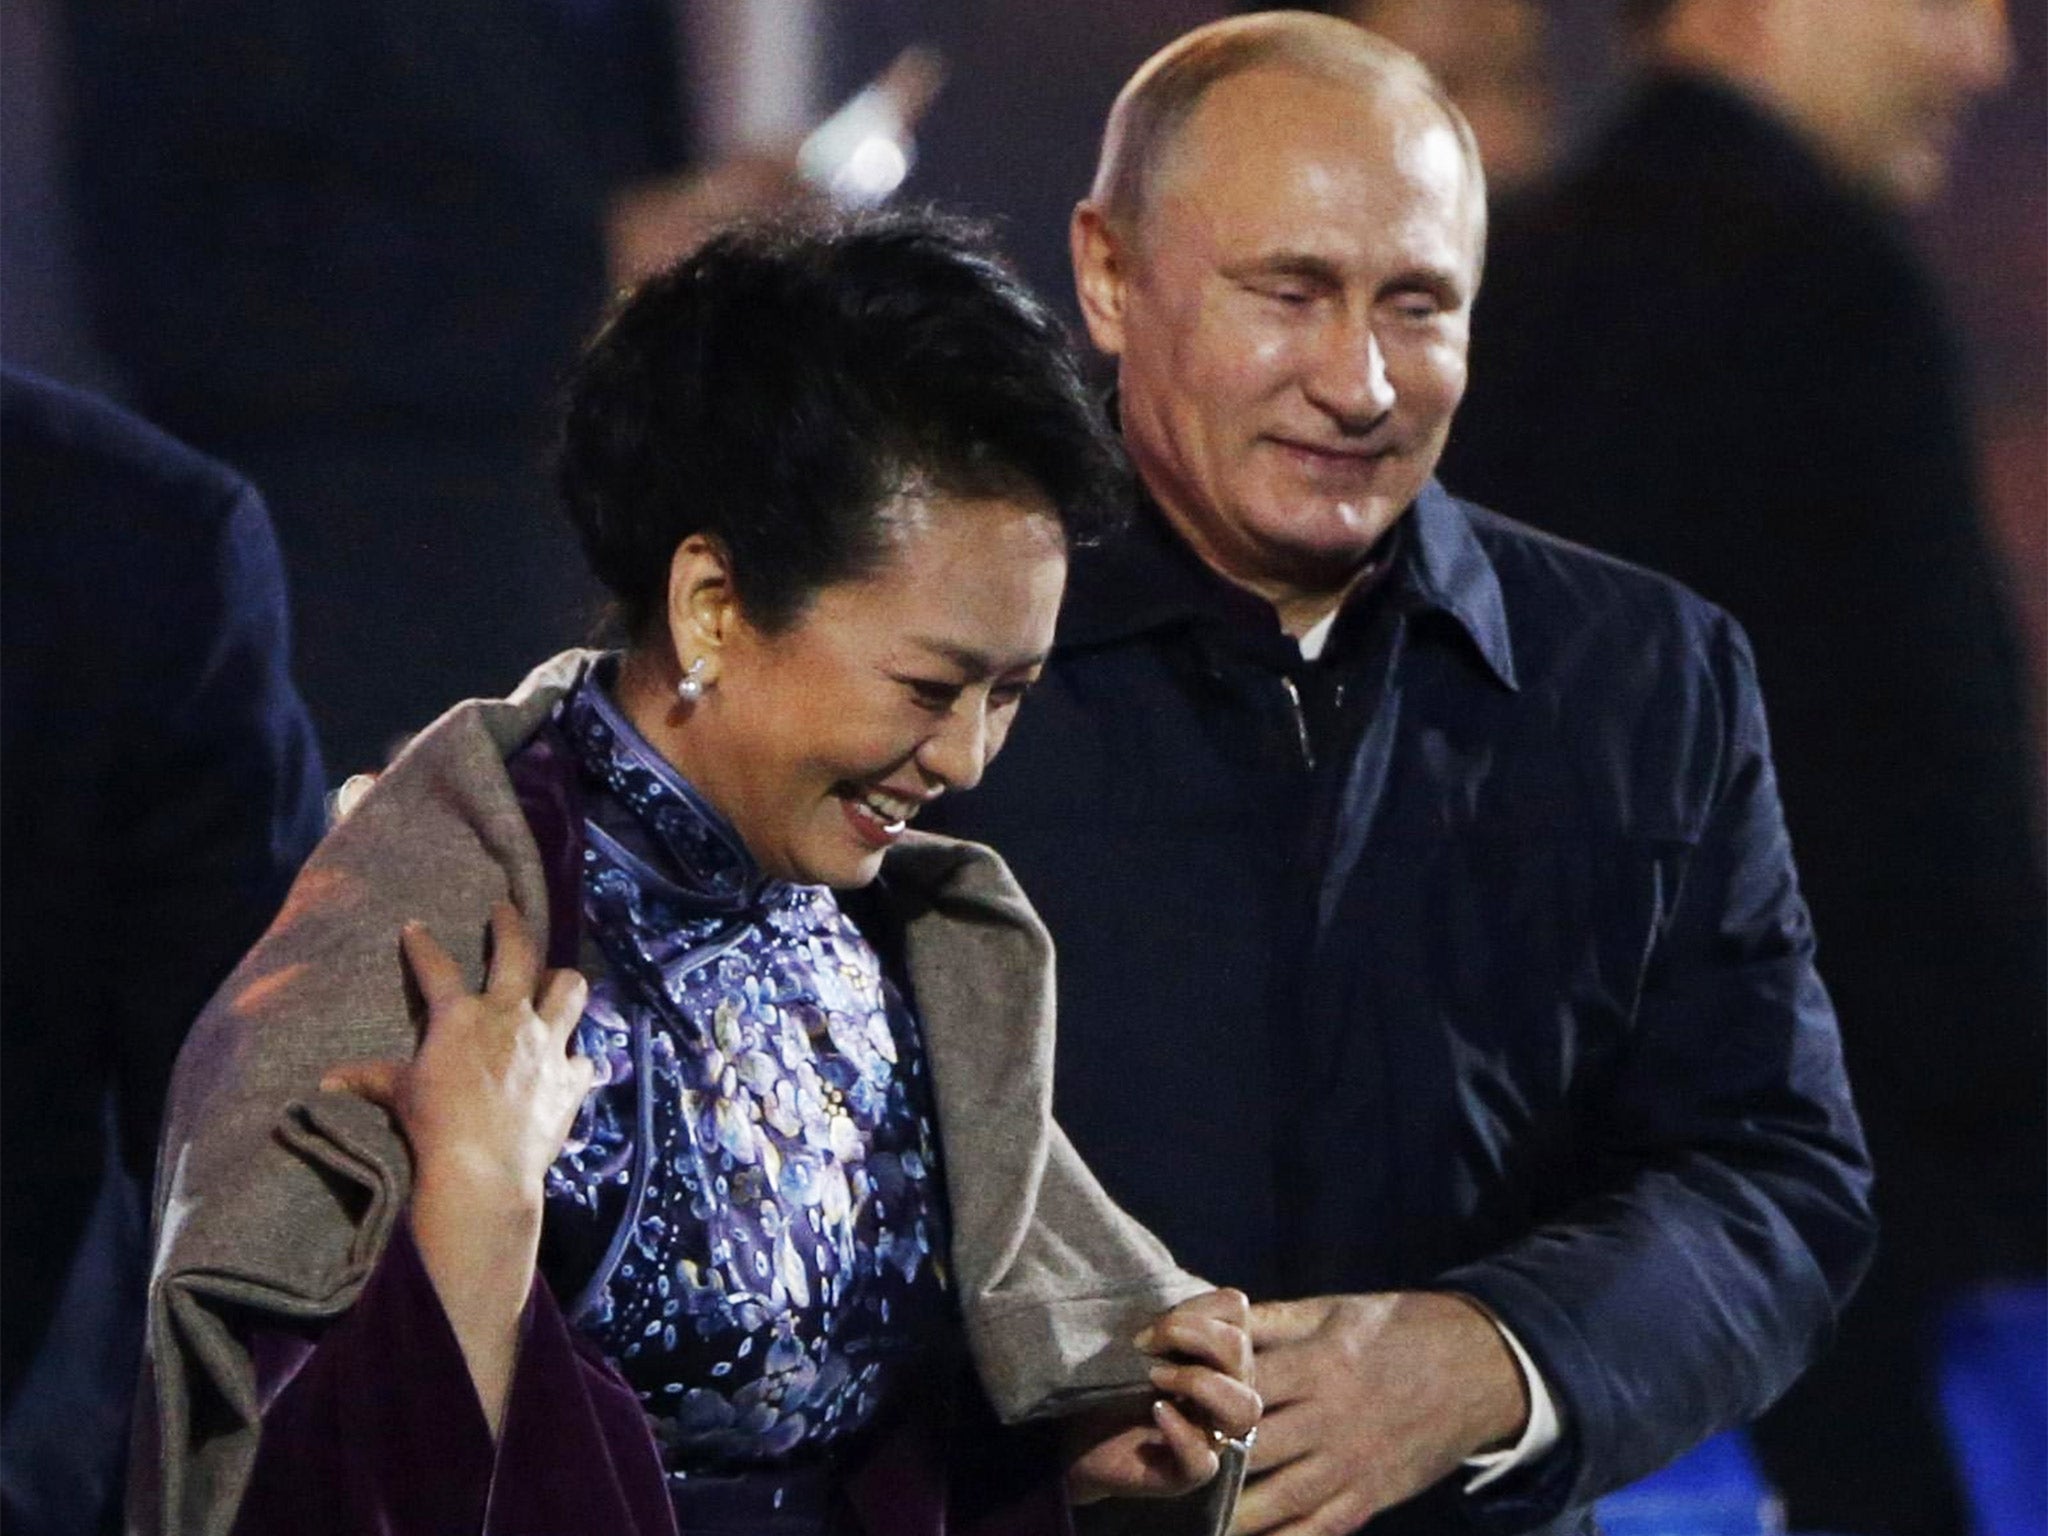 Vladimir Putin got cosy with the Chinese First Lady, Peng Liyuan, while watching fireworks